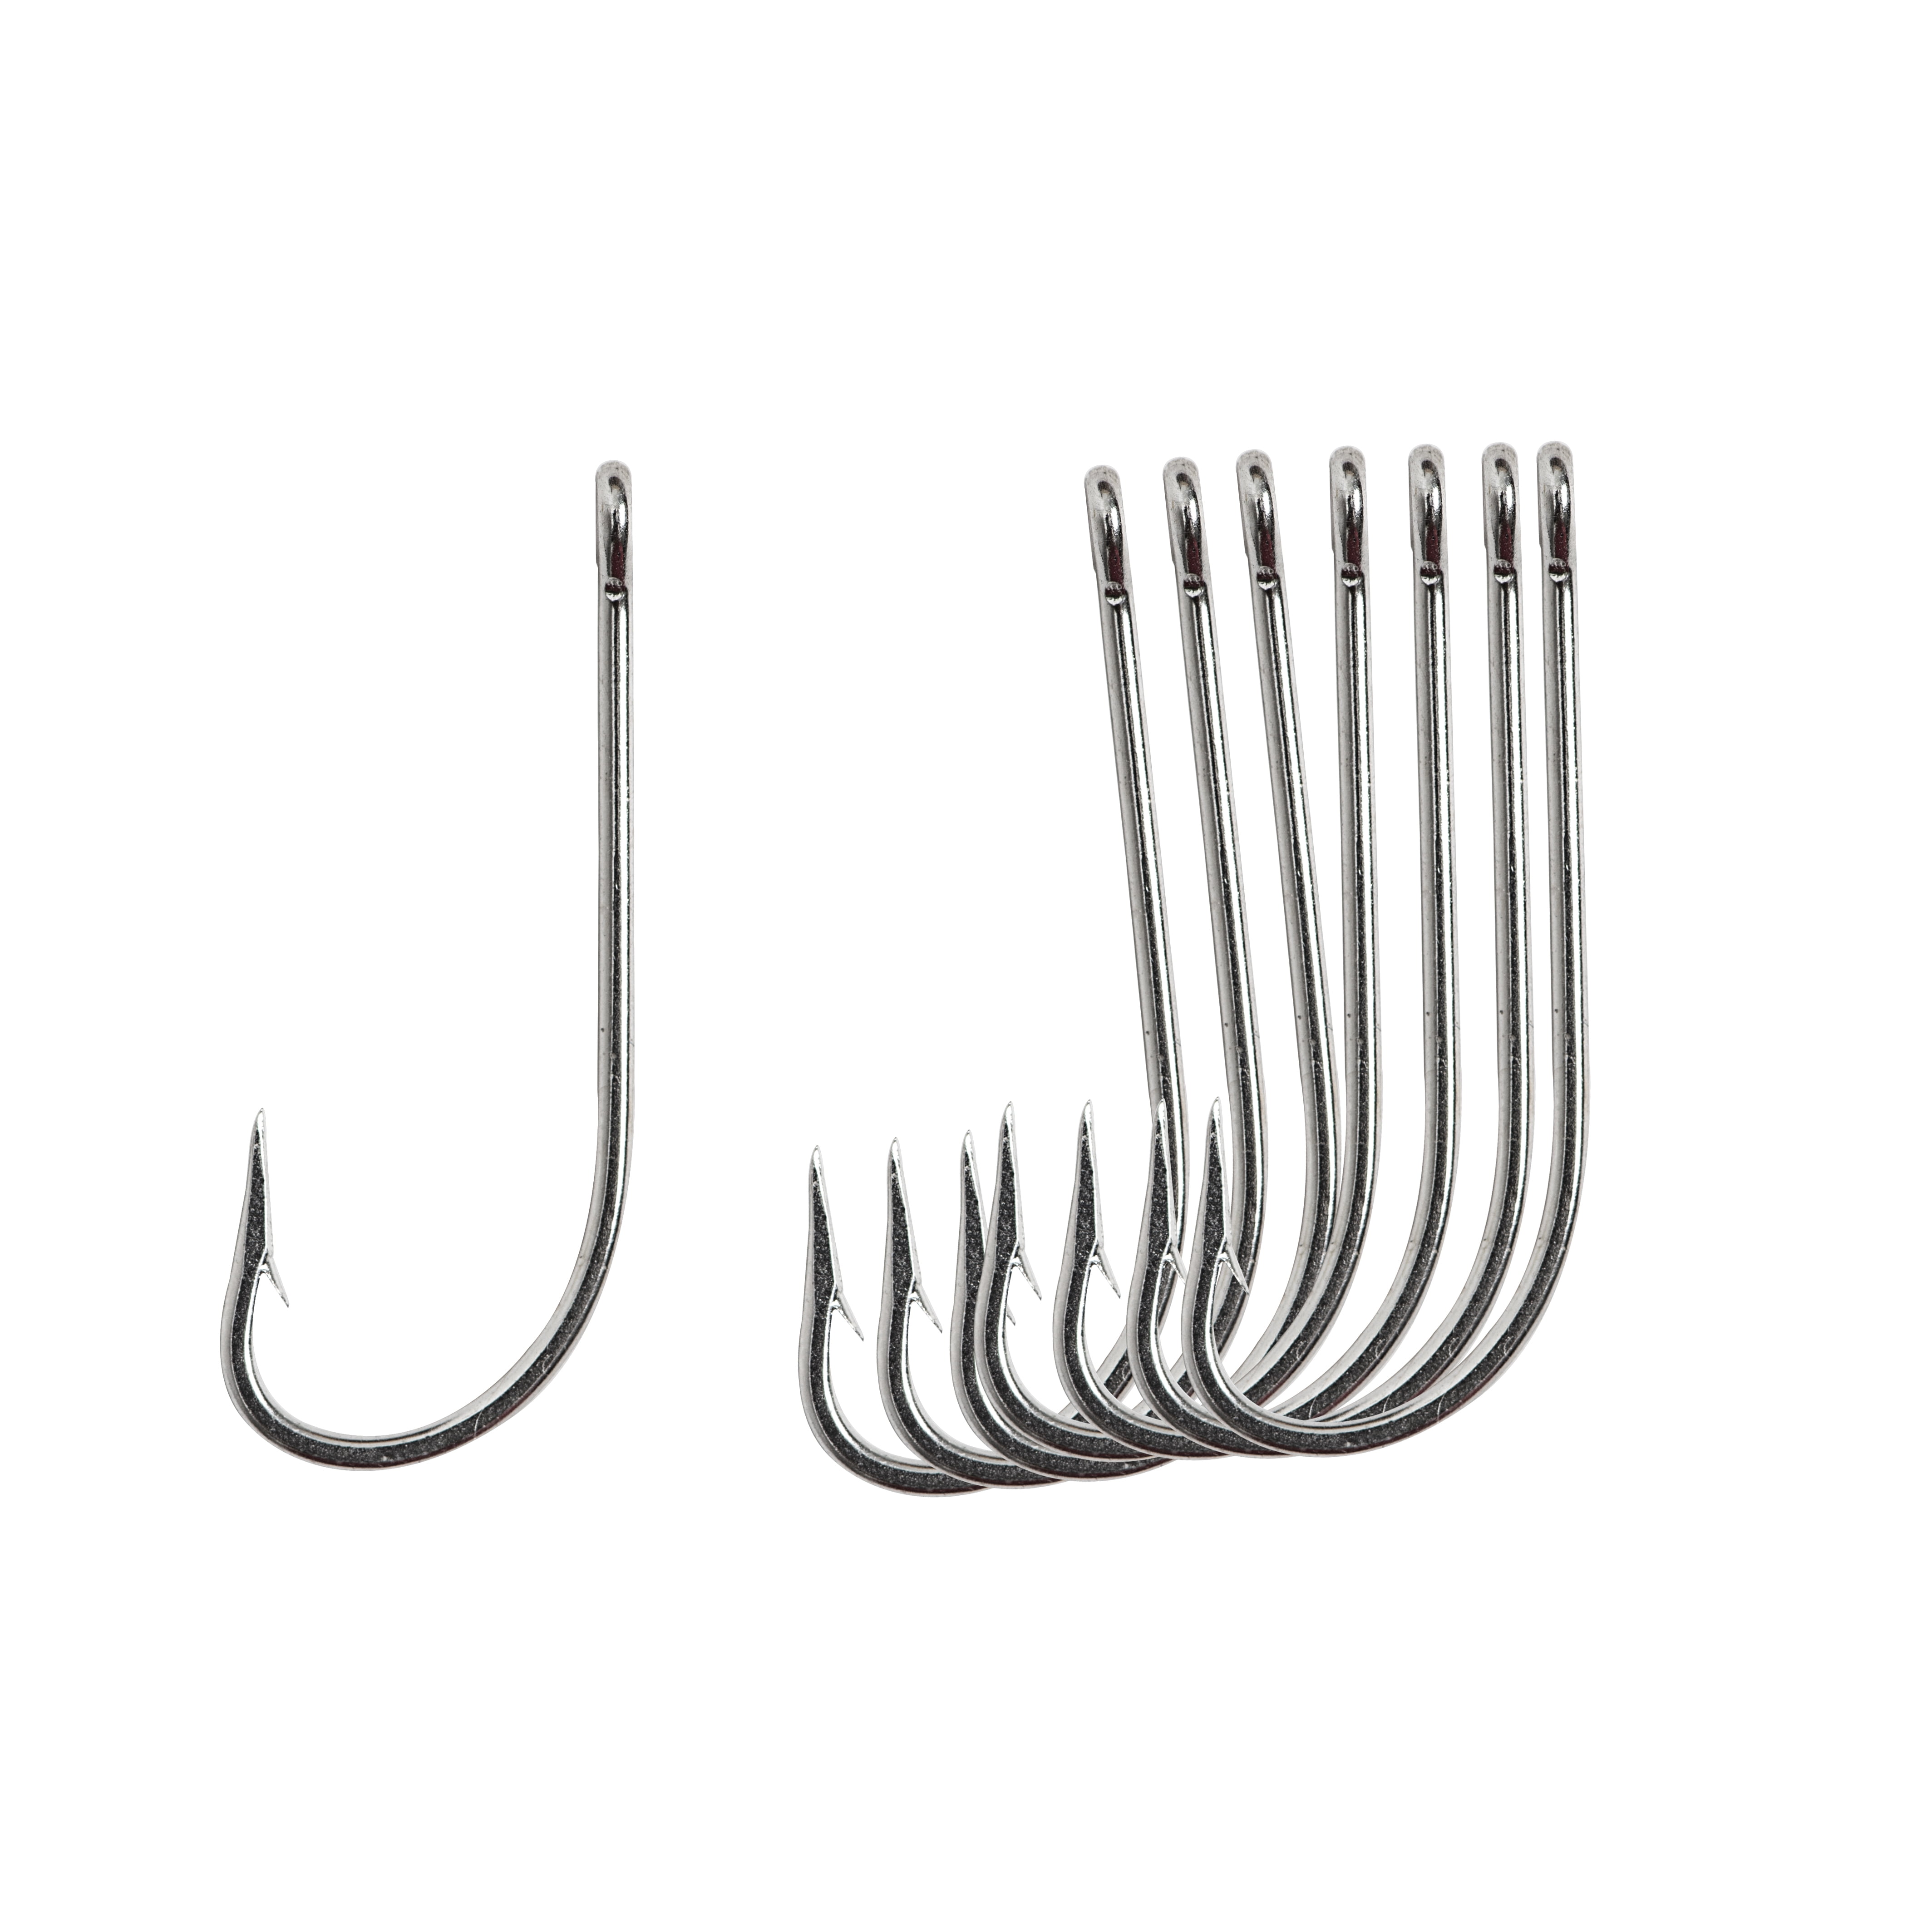 Mustad O'Shaughnessy Hook - Size: #6 (Duratin) 10pc